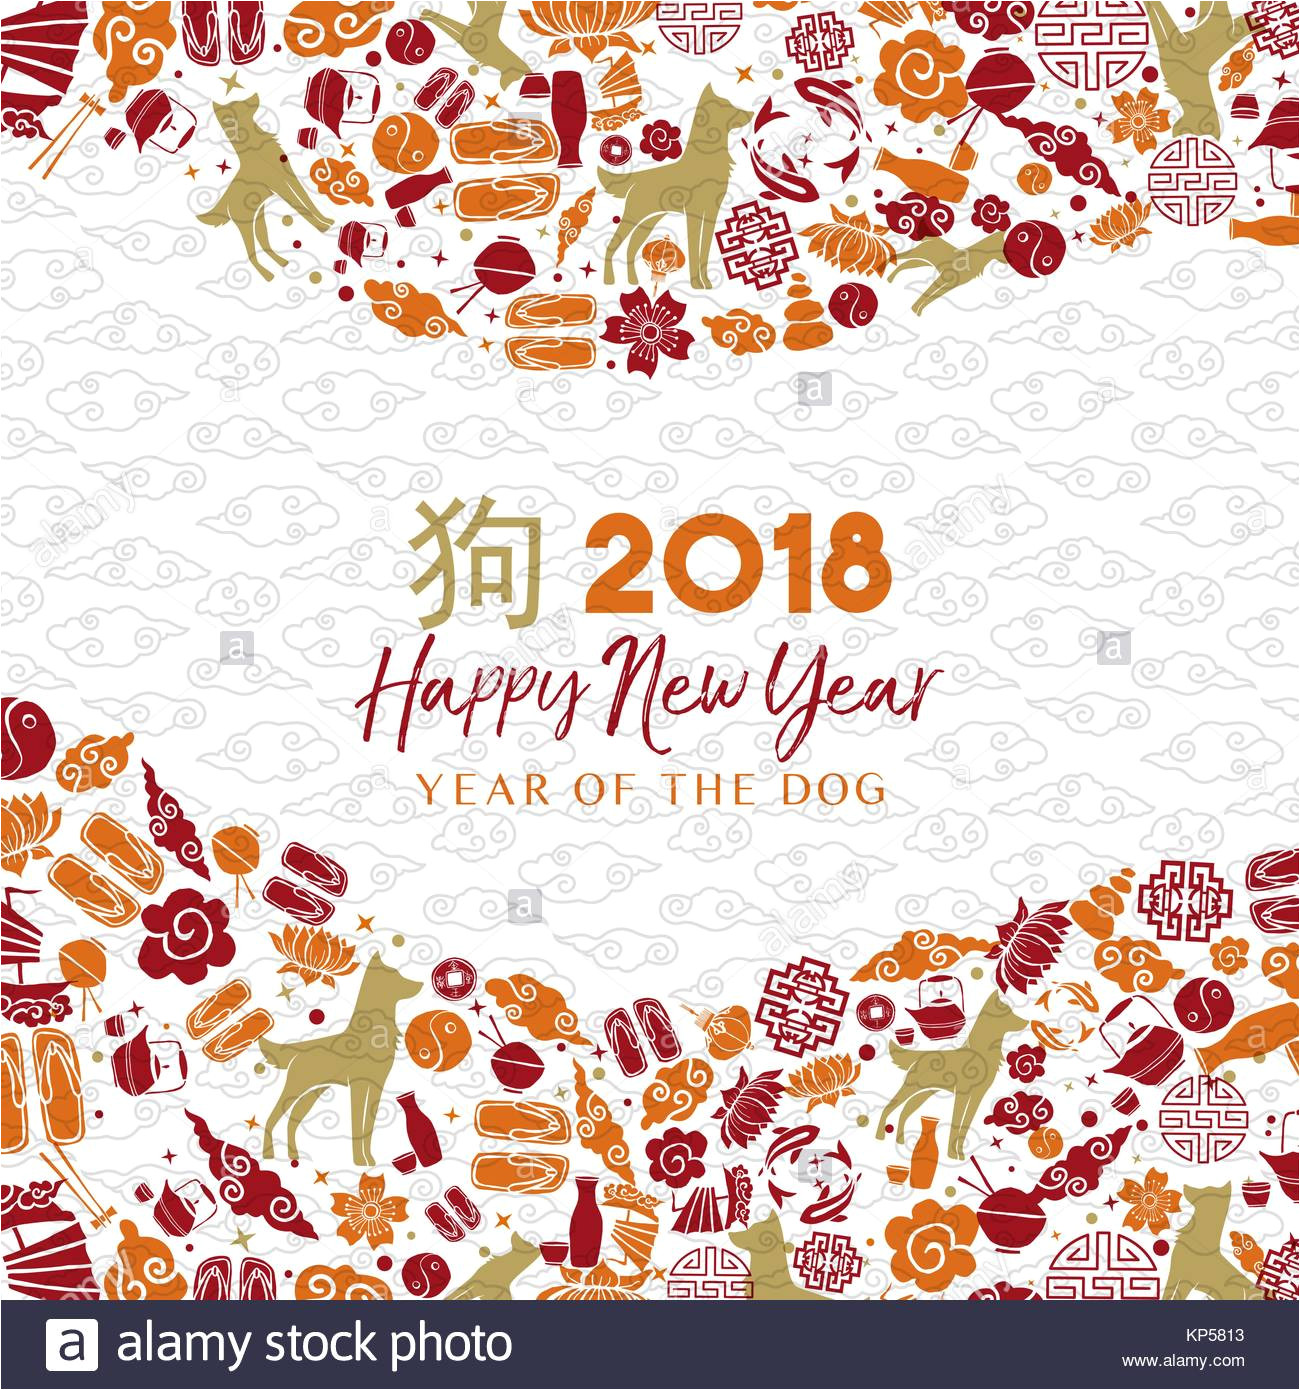 happy chinese new year of the dog 2018 greeting card illustration kp5813 jpg